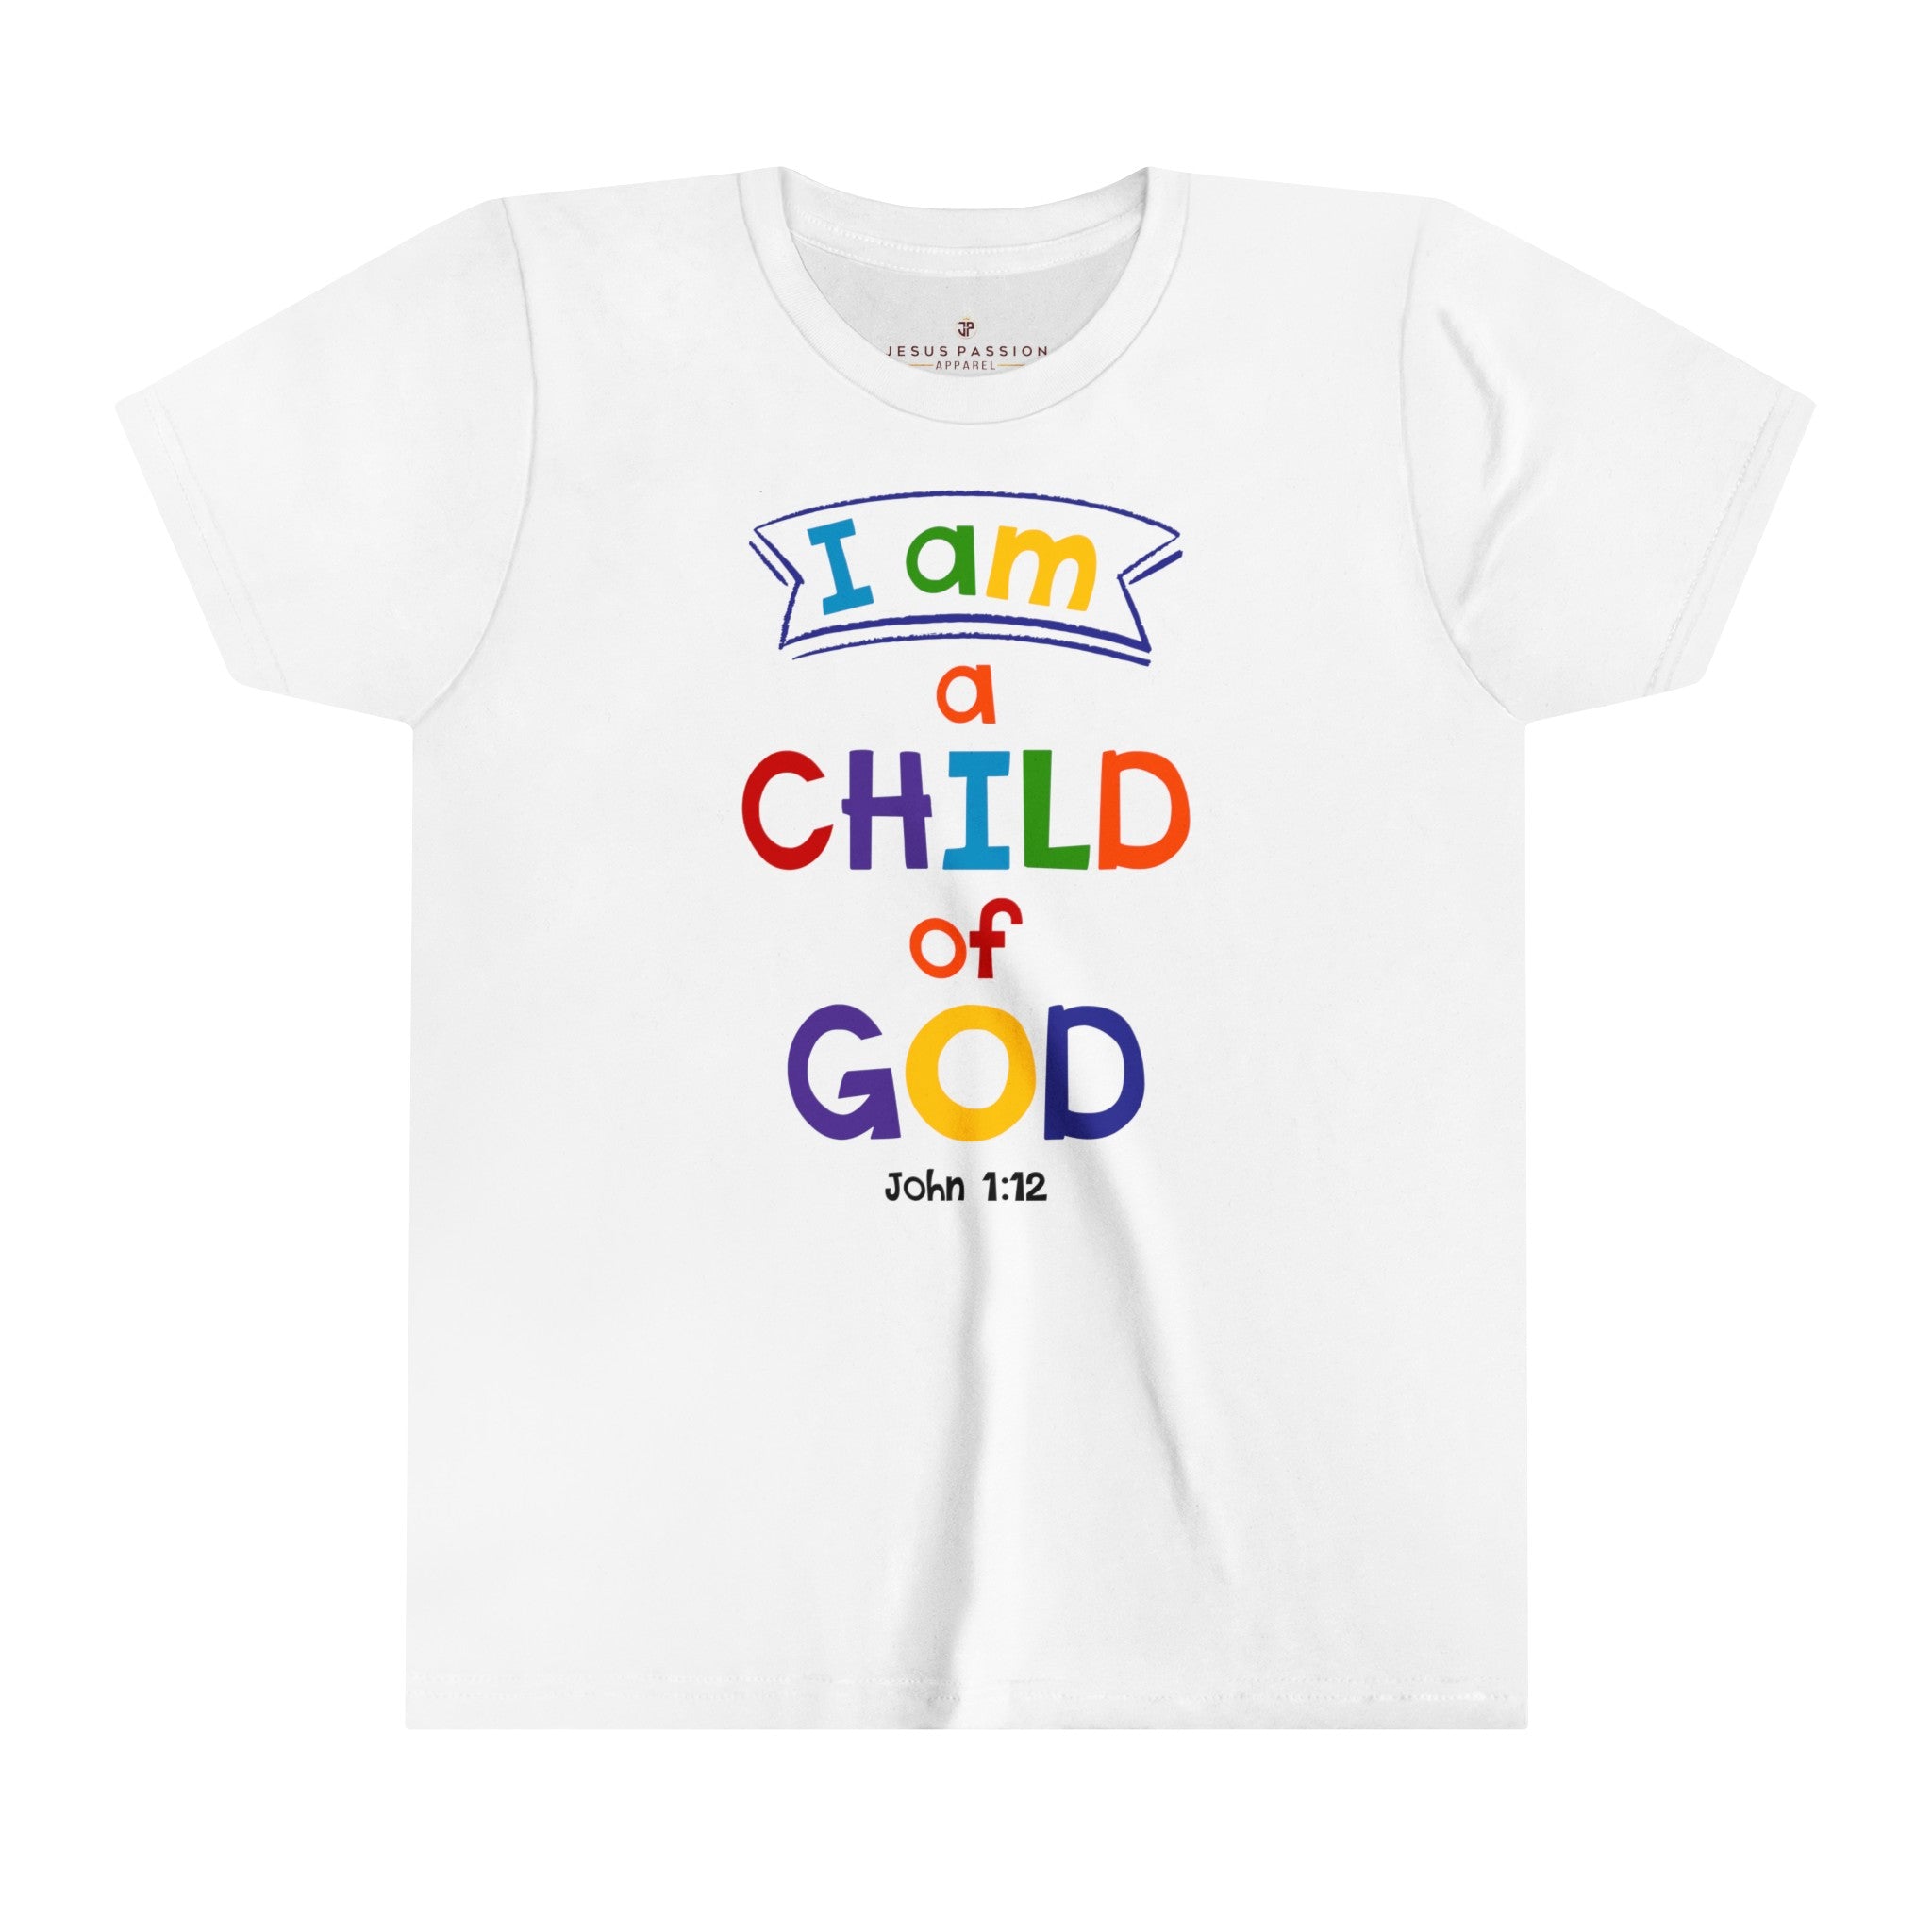 I am a Child of God Youth Unisex Relaxed Fit T-Shirt Colors: White Sizes: S Jesus Passion Apparel